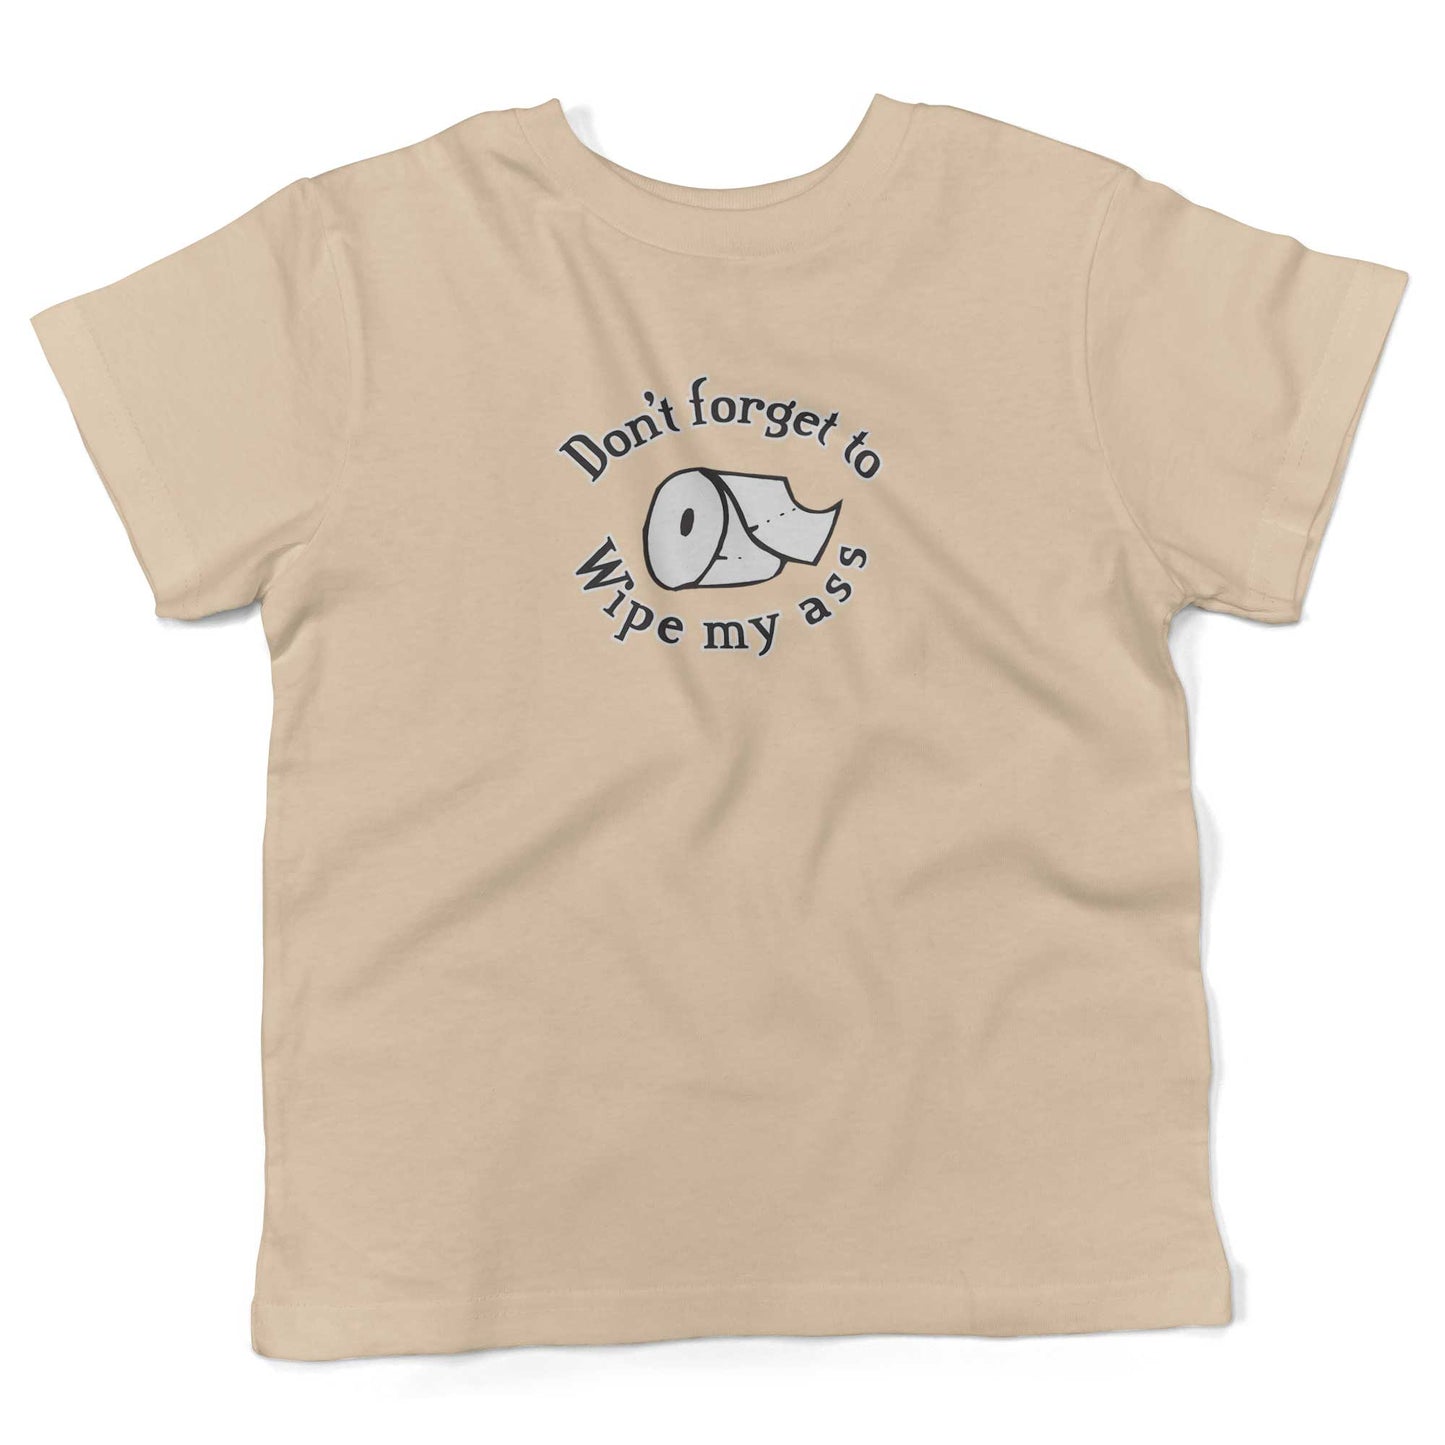 Don't Forget To Wipe My Ass Toddler Shirt-Organic Natural-2T